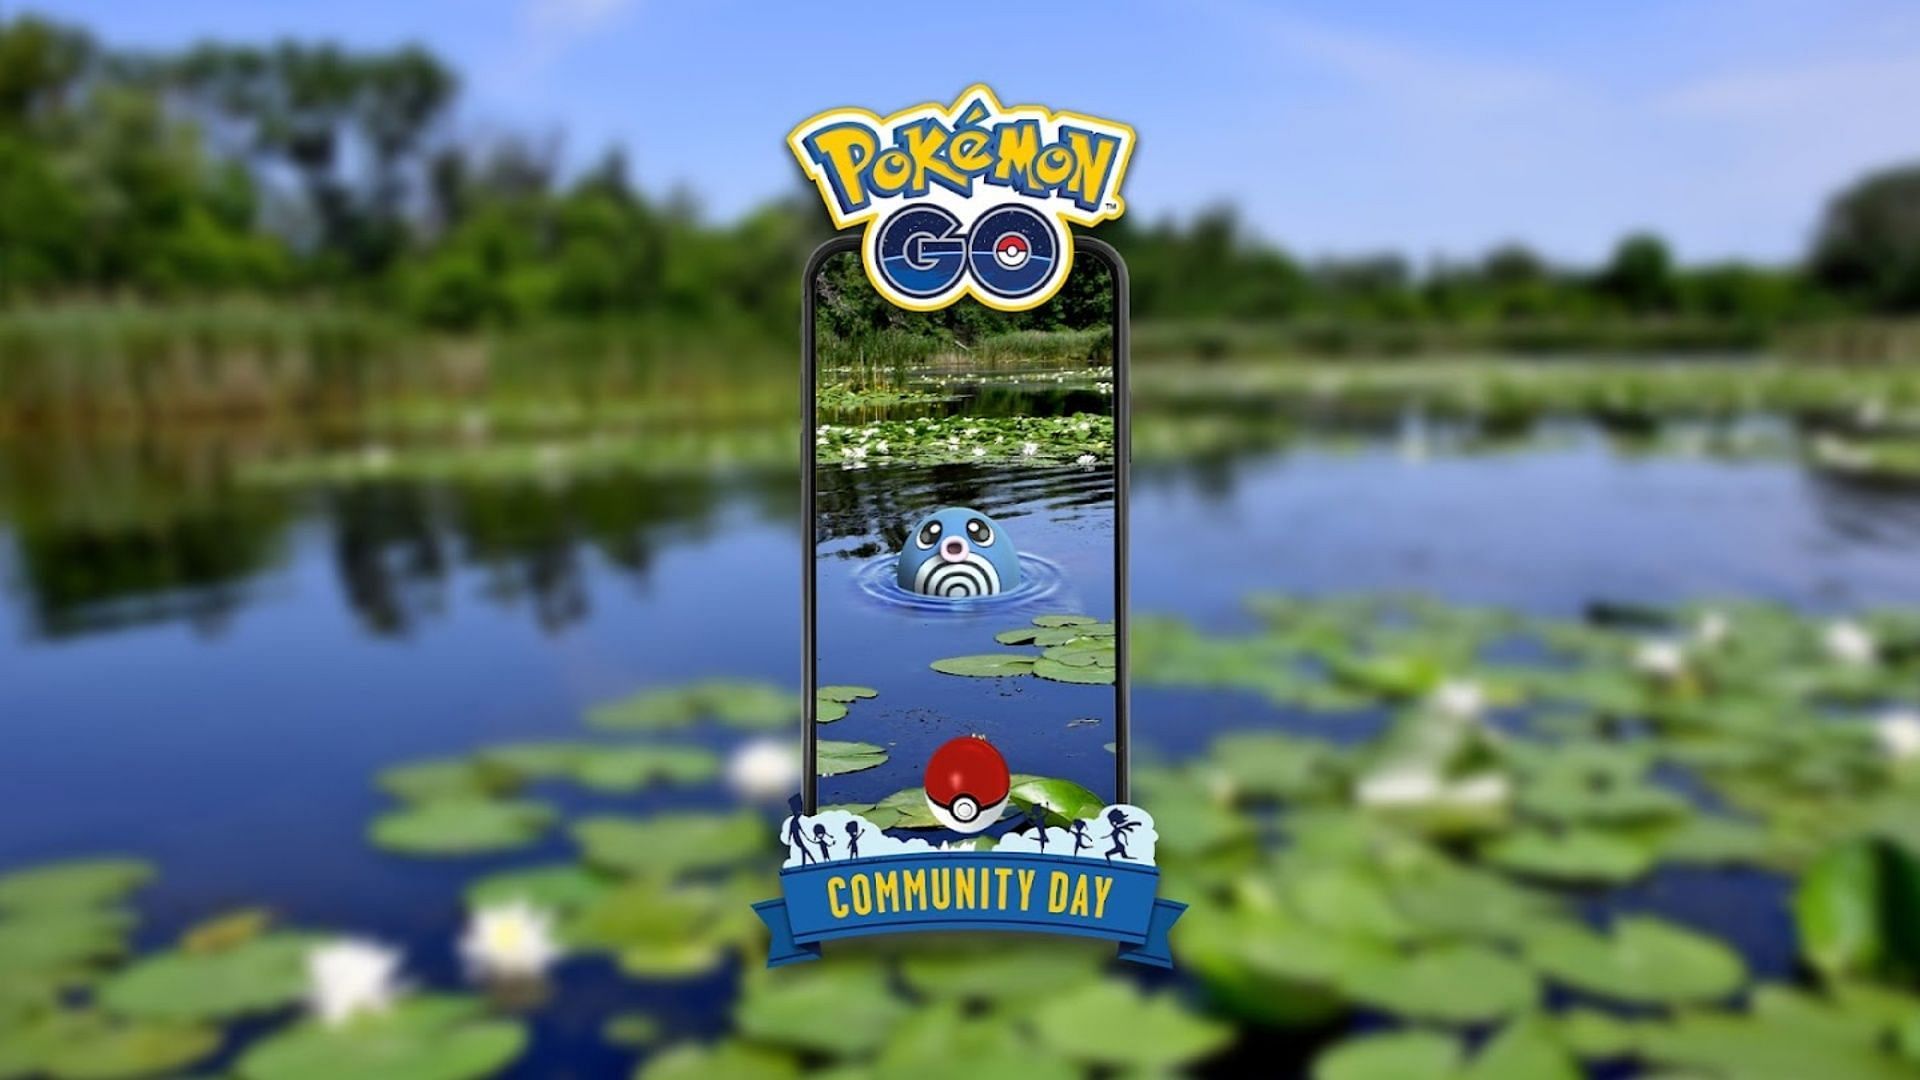 Poliwag will feature in July 2023 Community Day (Image via Pokemon GO)